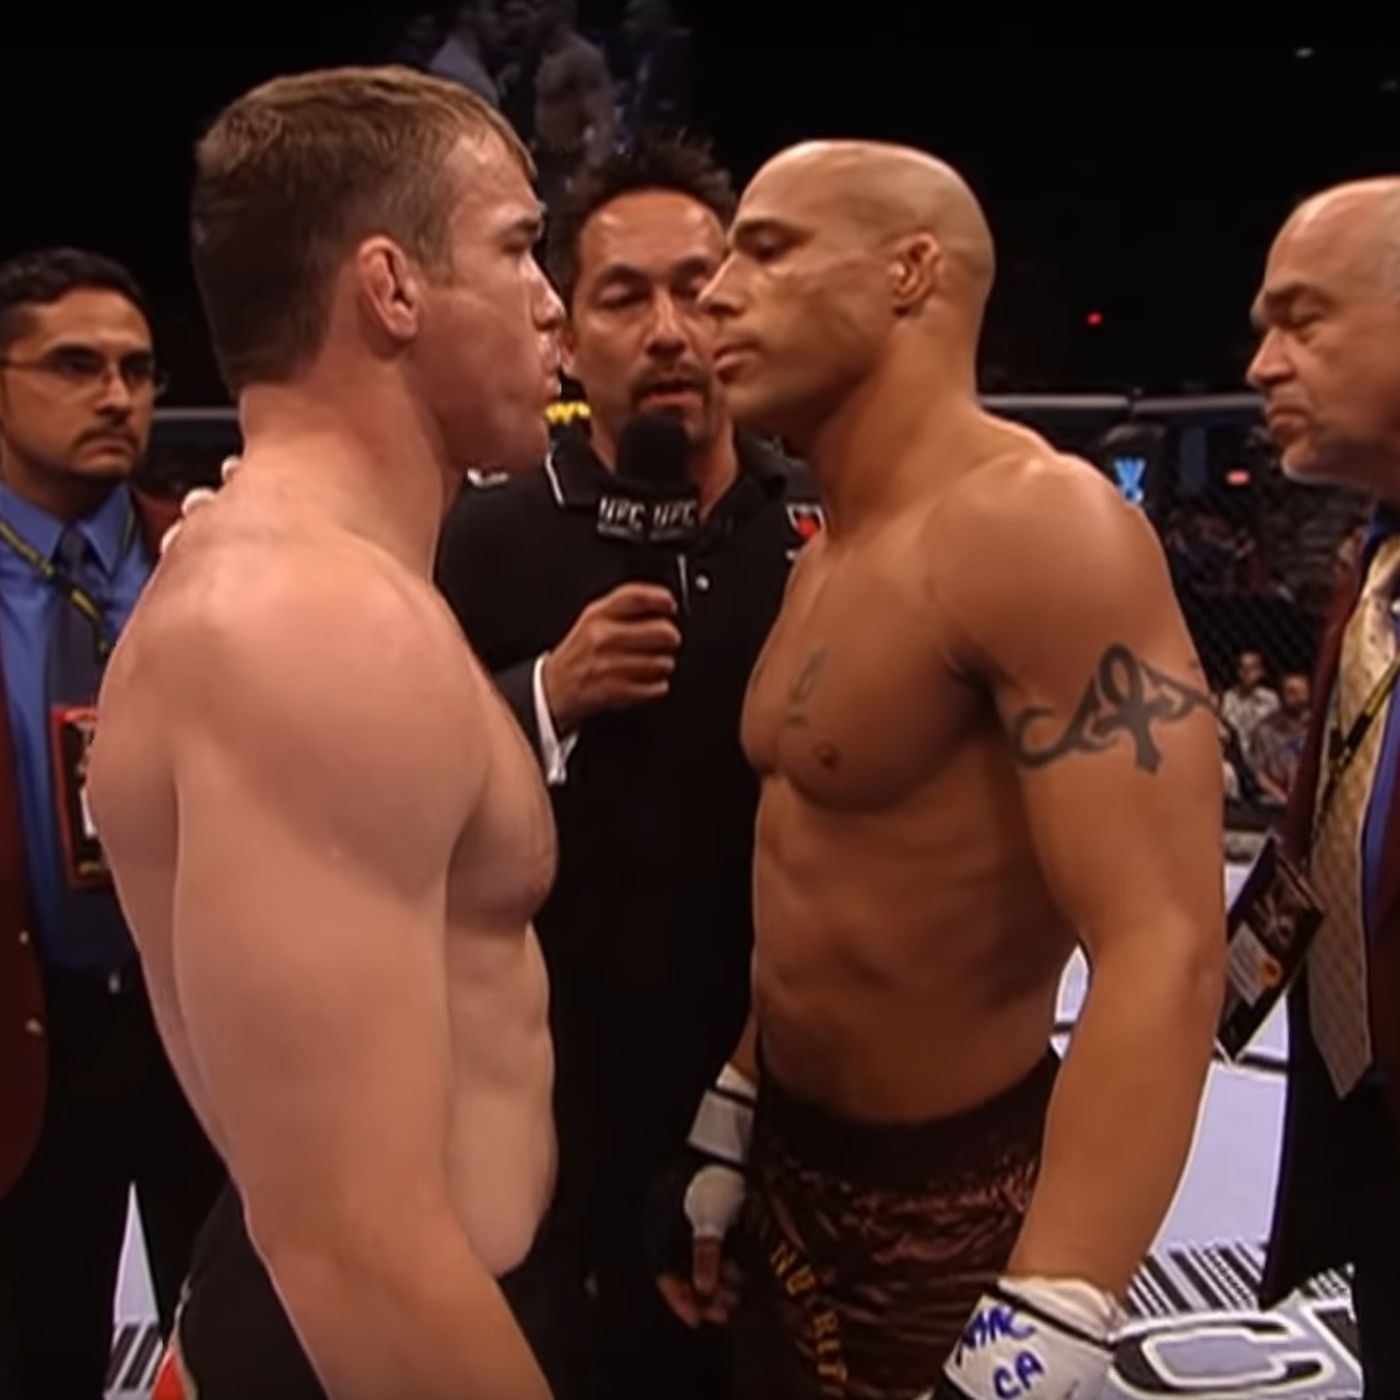 UFC full fight video: Matt Hughes and Frank Trigg face off in dramatic rematch - MMA Fighting